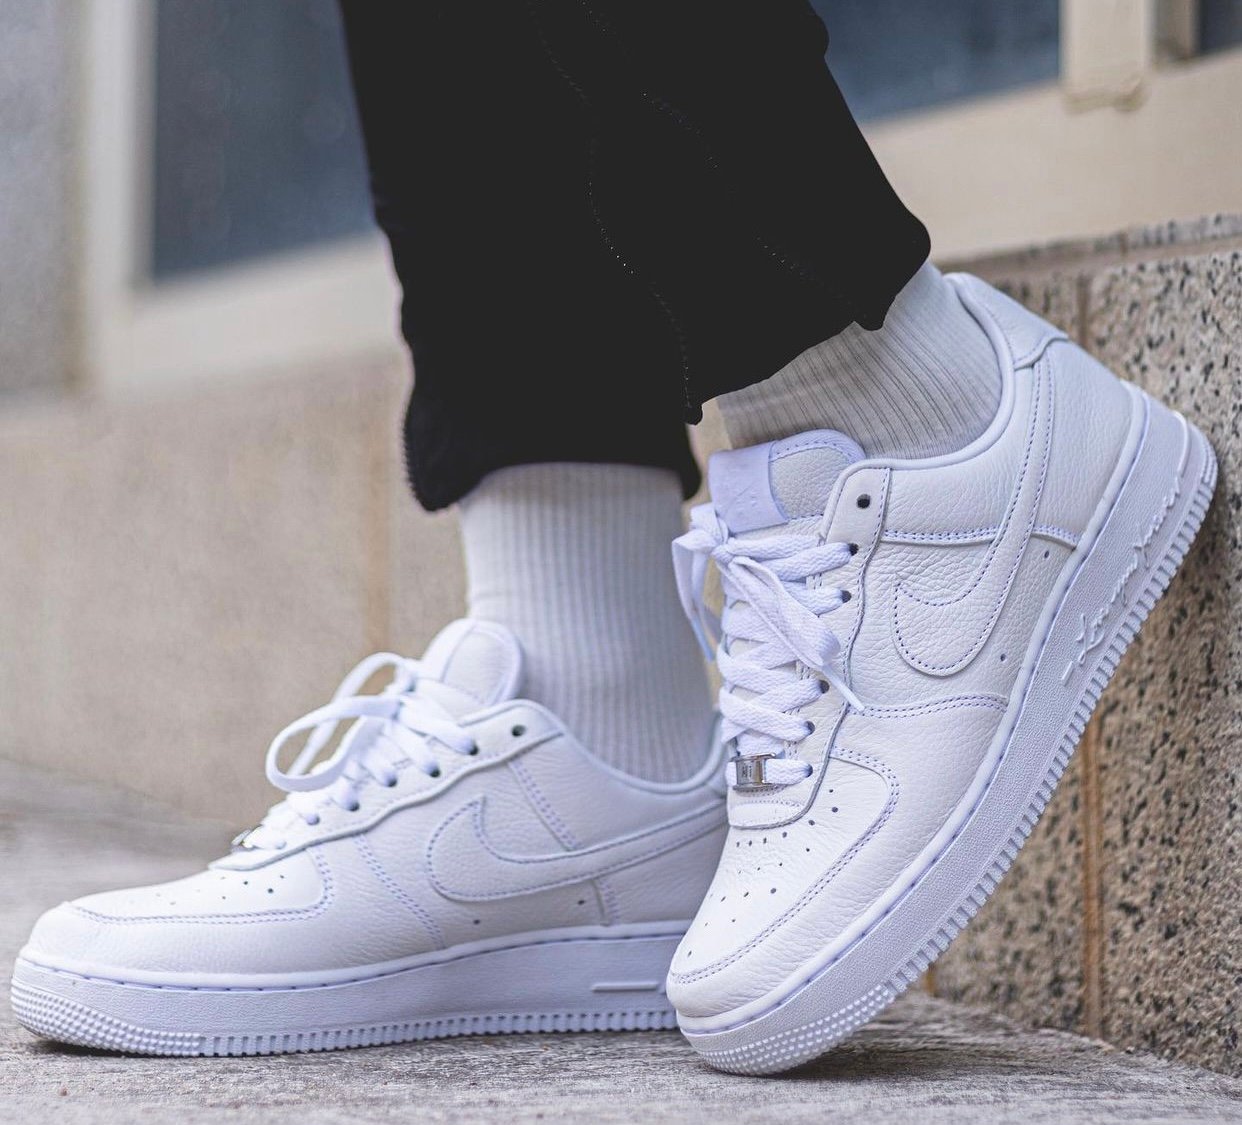 Drake NOCTA Nike Air Force 1 Certified Lover Boy White Release Date Info